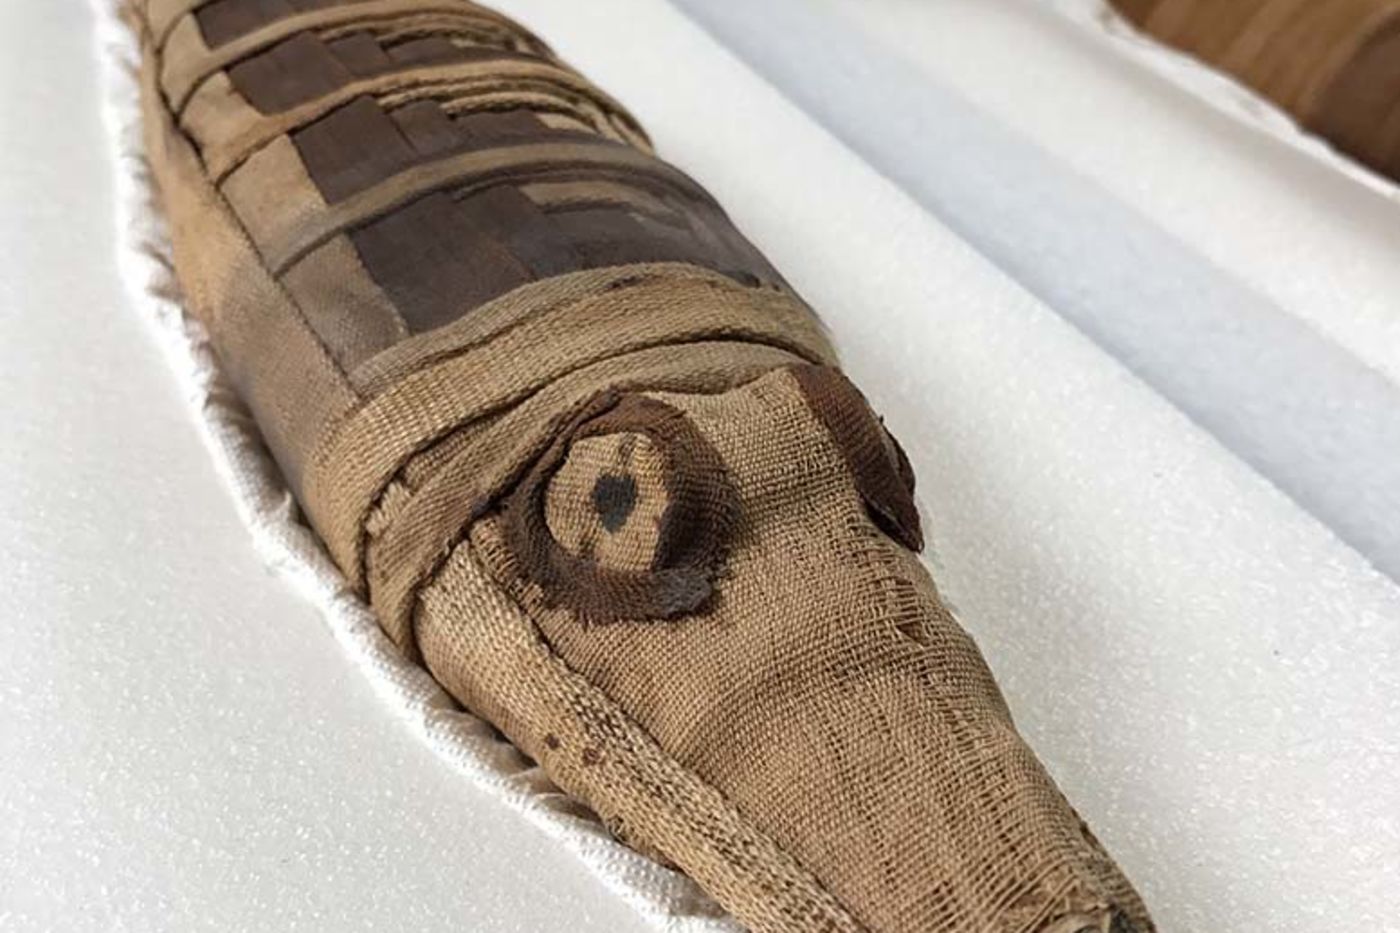 Close-up of a small crocodile mummy wrapped in brown cloth with the eyes drawn on, and other similar bundles in the background